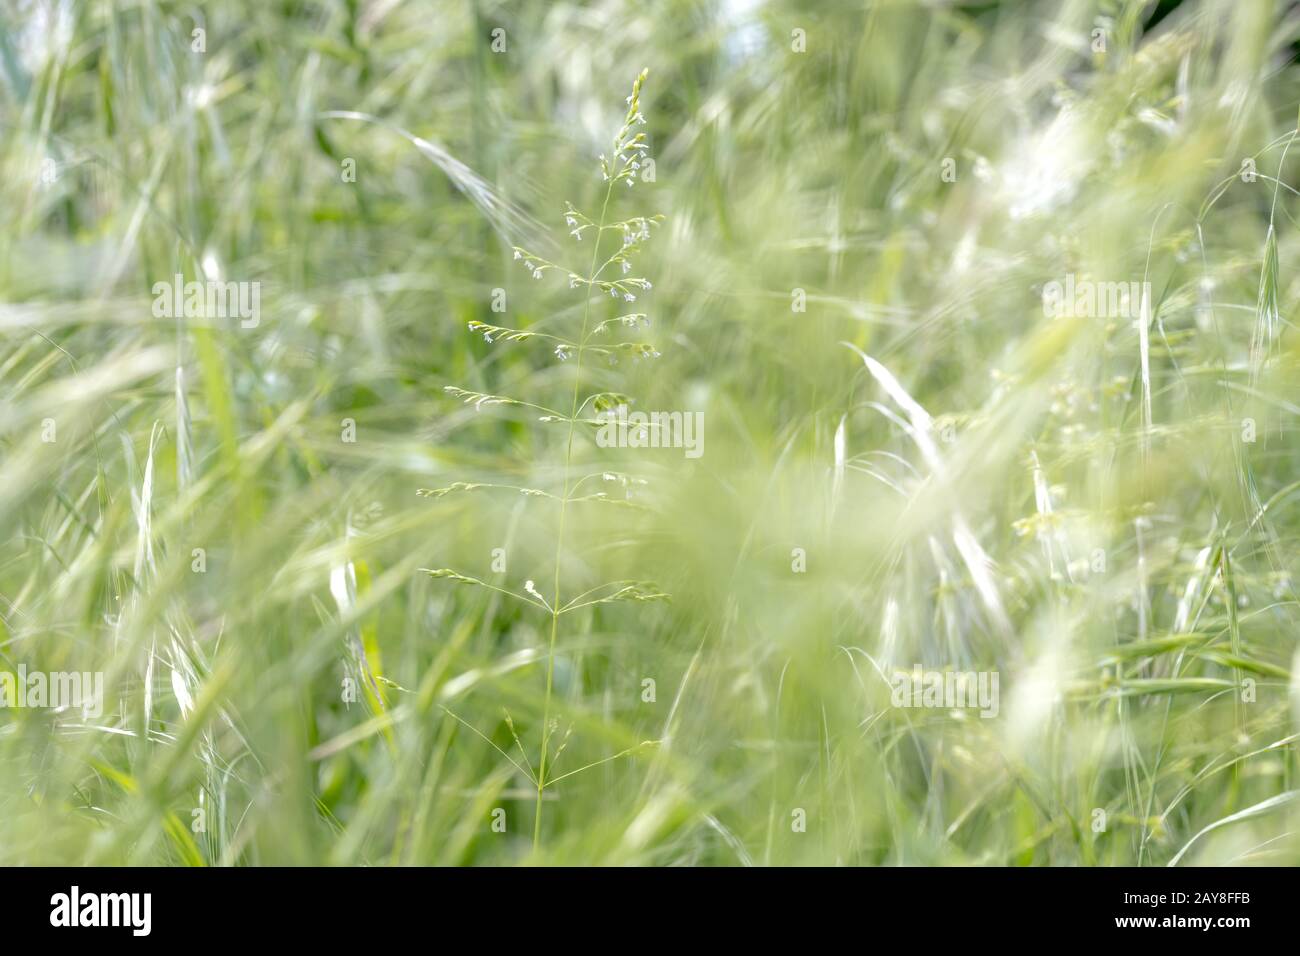 Single blooming blade of grass in front of bright blurred green grass Stock Photo